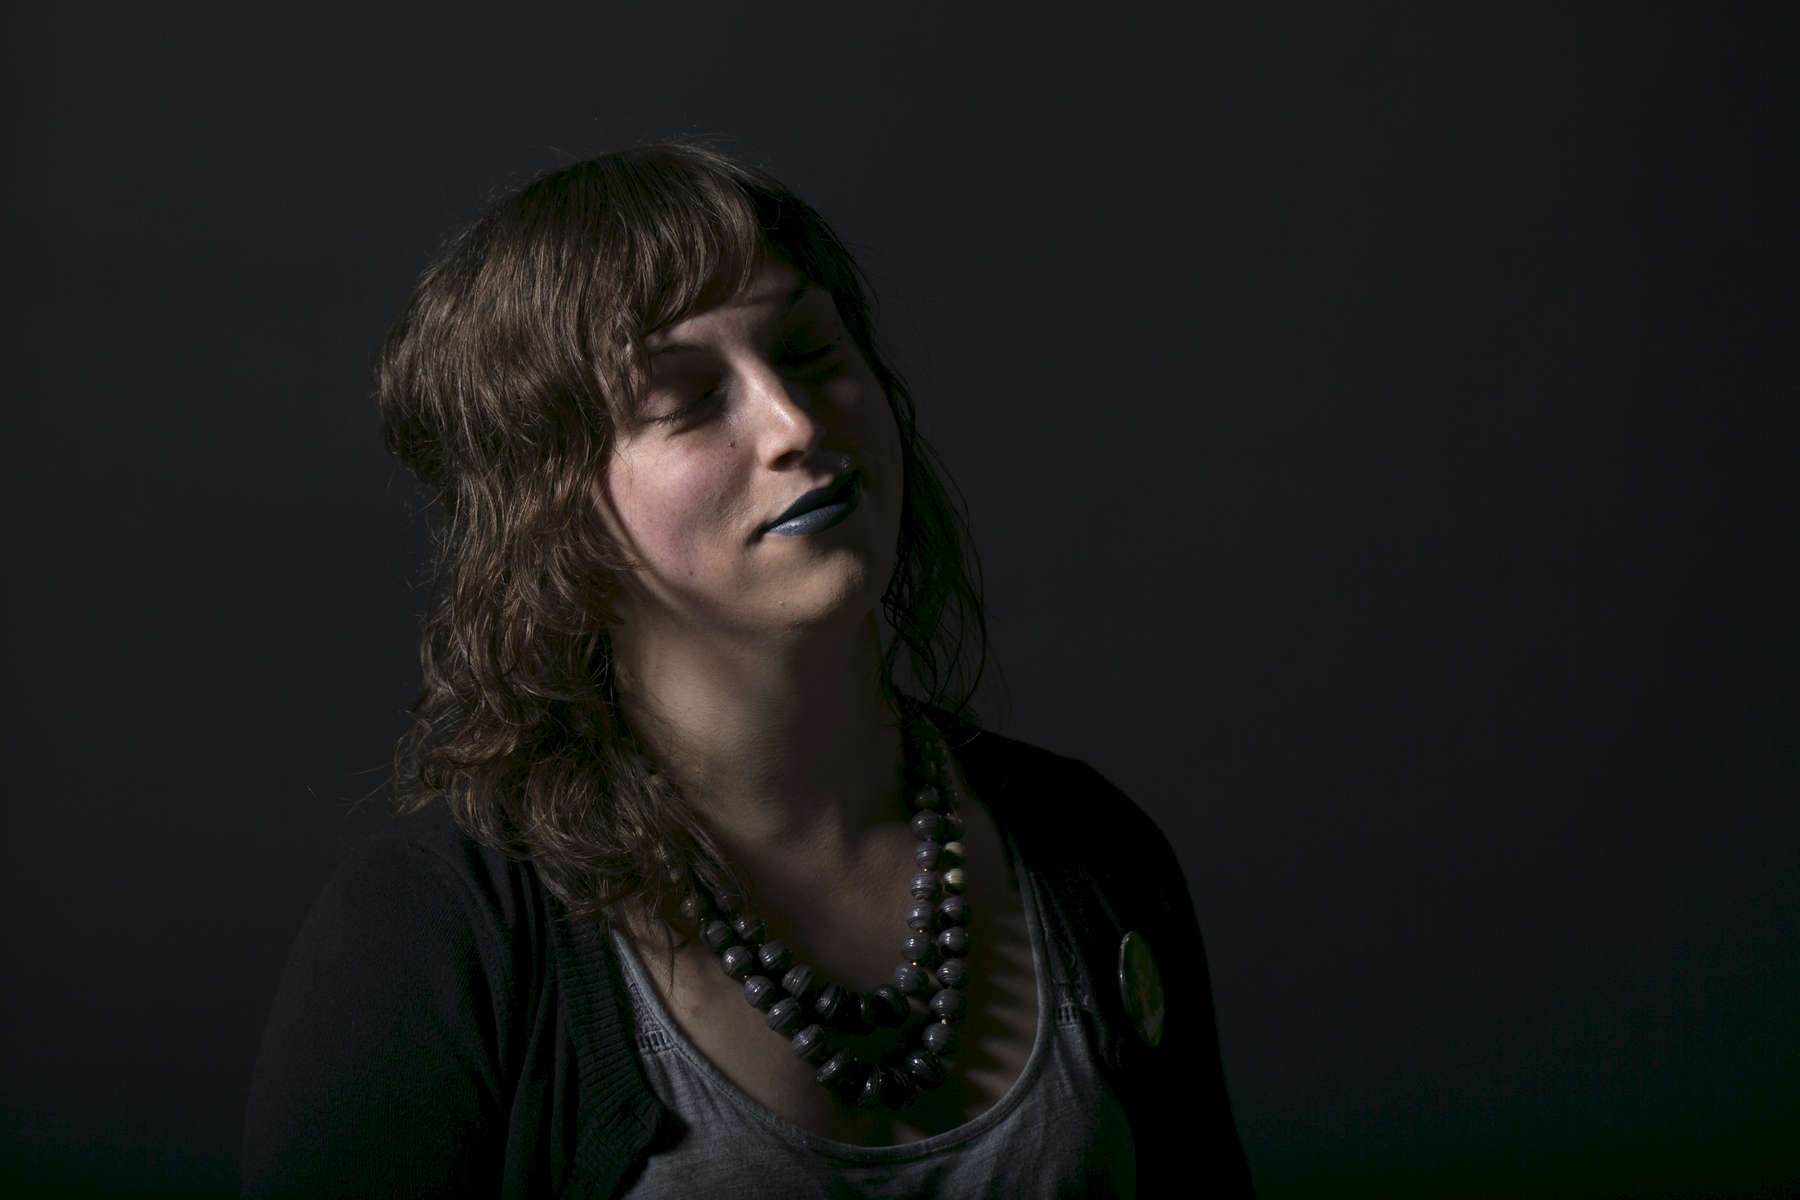 Madisyn Artemesia DelPorto, 28, of Portland, says she she presented as {quote}a super gender queer, nonbinary person for years.{quote} She then {quote}gradually wandered further and further into femininity and eventually started HRT [hormone replacement therapy] and found that the most comfortable place for me to live my life was as a woman.{quote}Kristyna Wentz-Graff/Staff